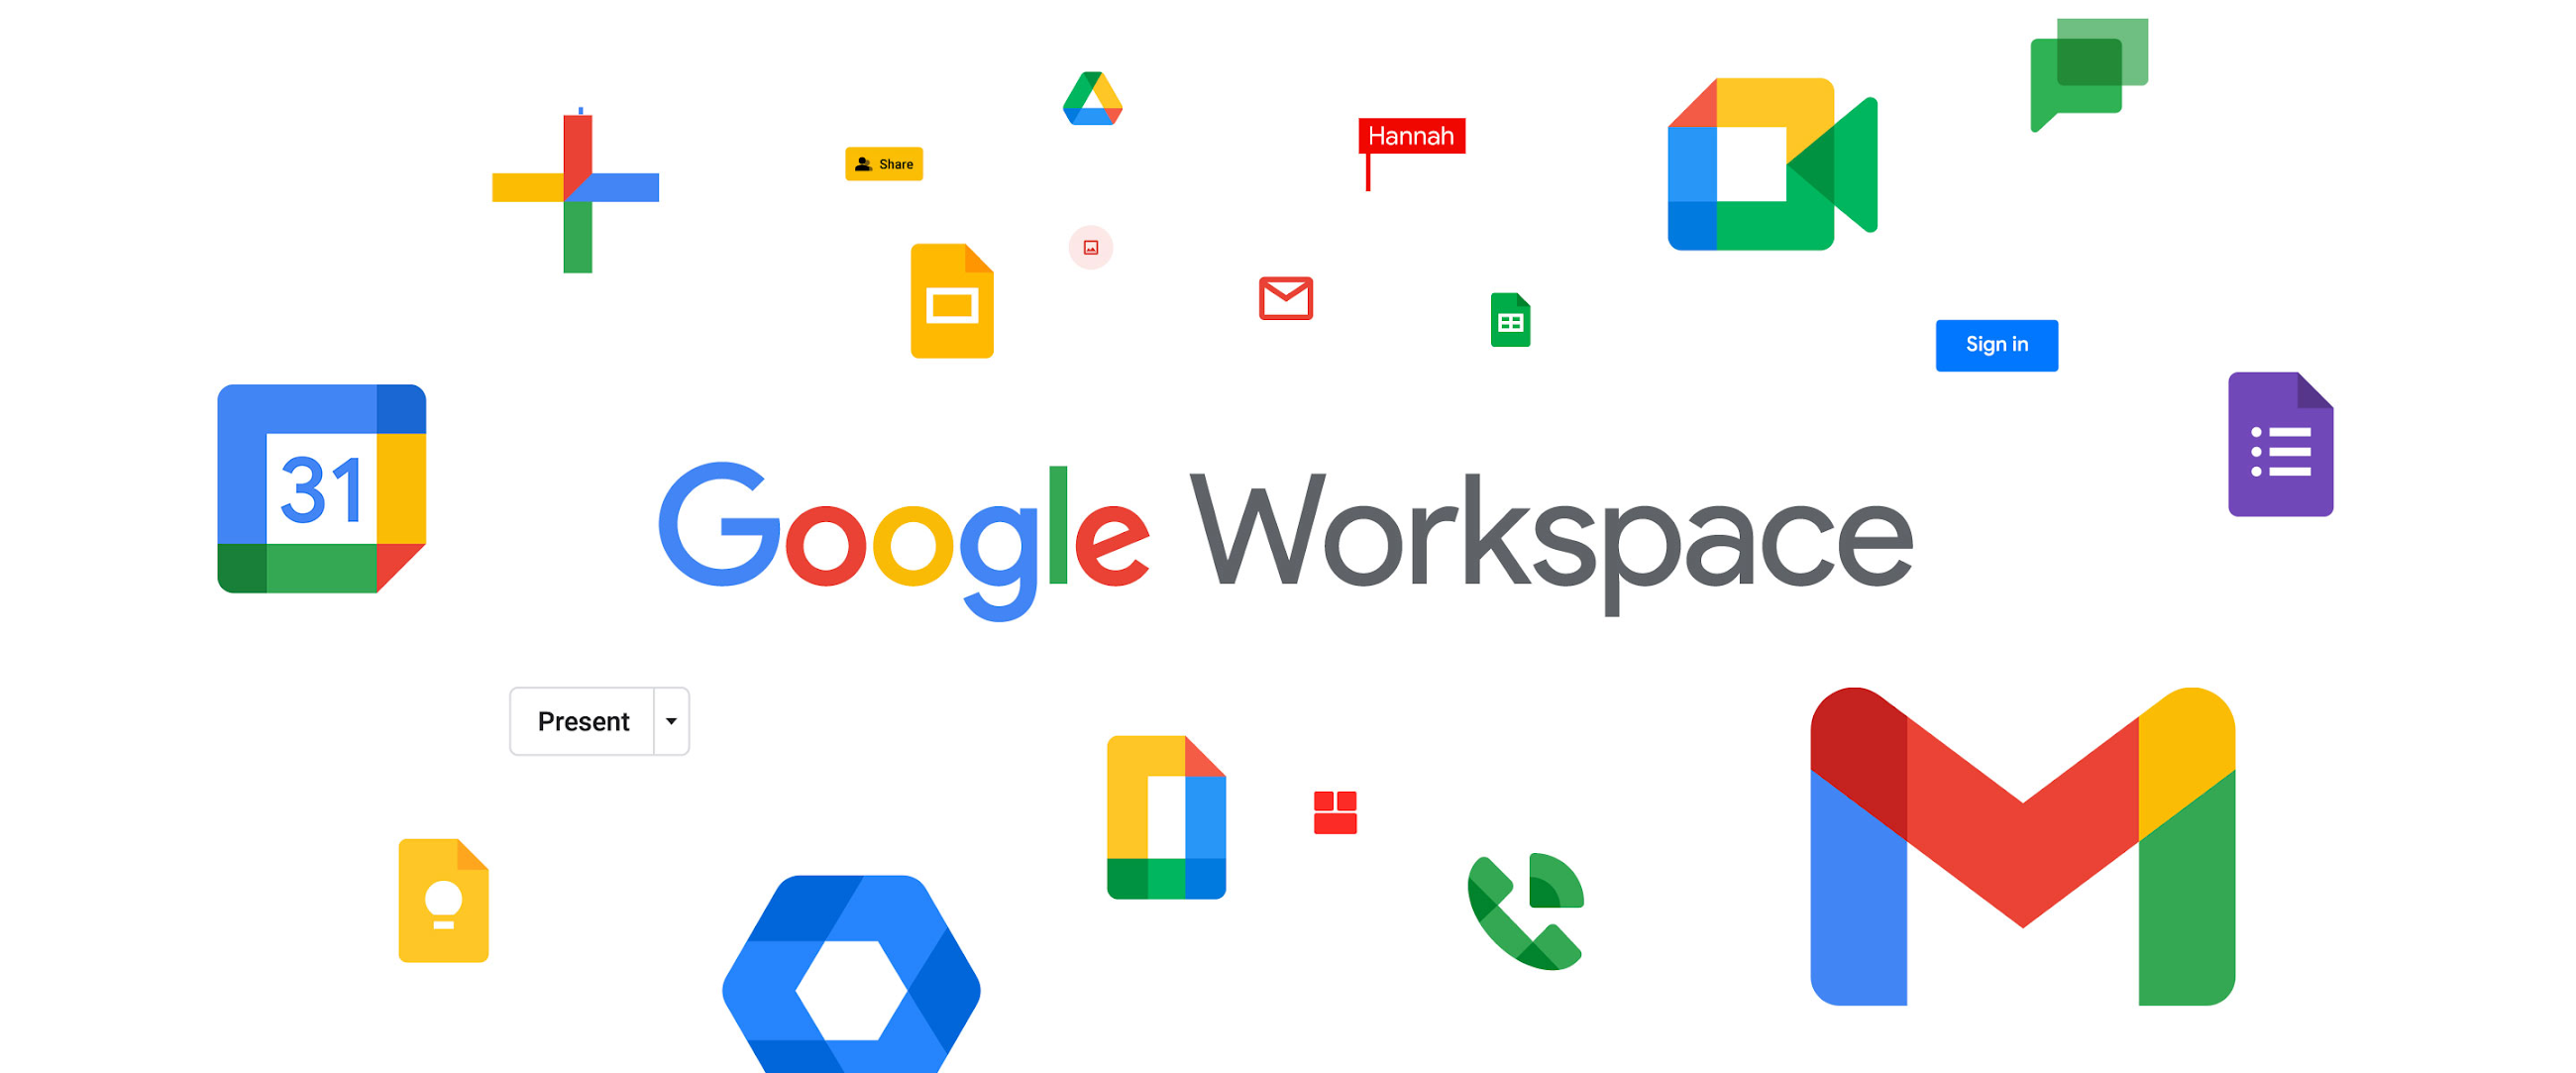 Google Workspace logo surrounded by various Google Workspace icons all against a white background